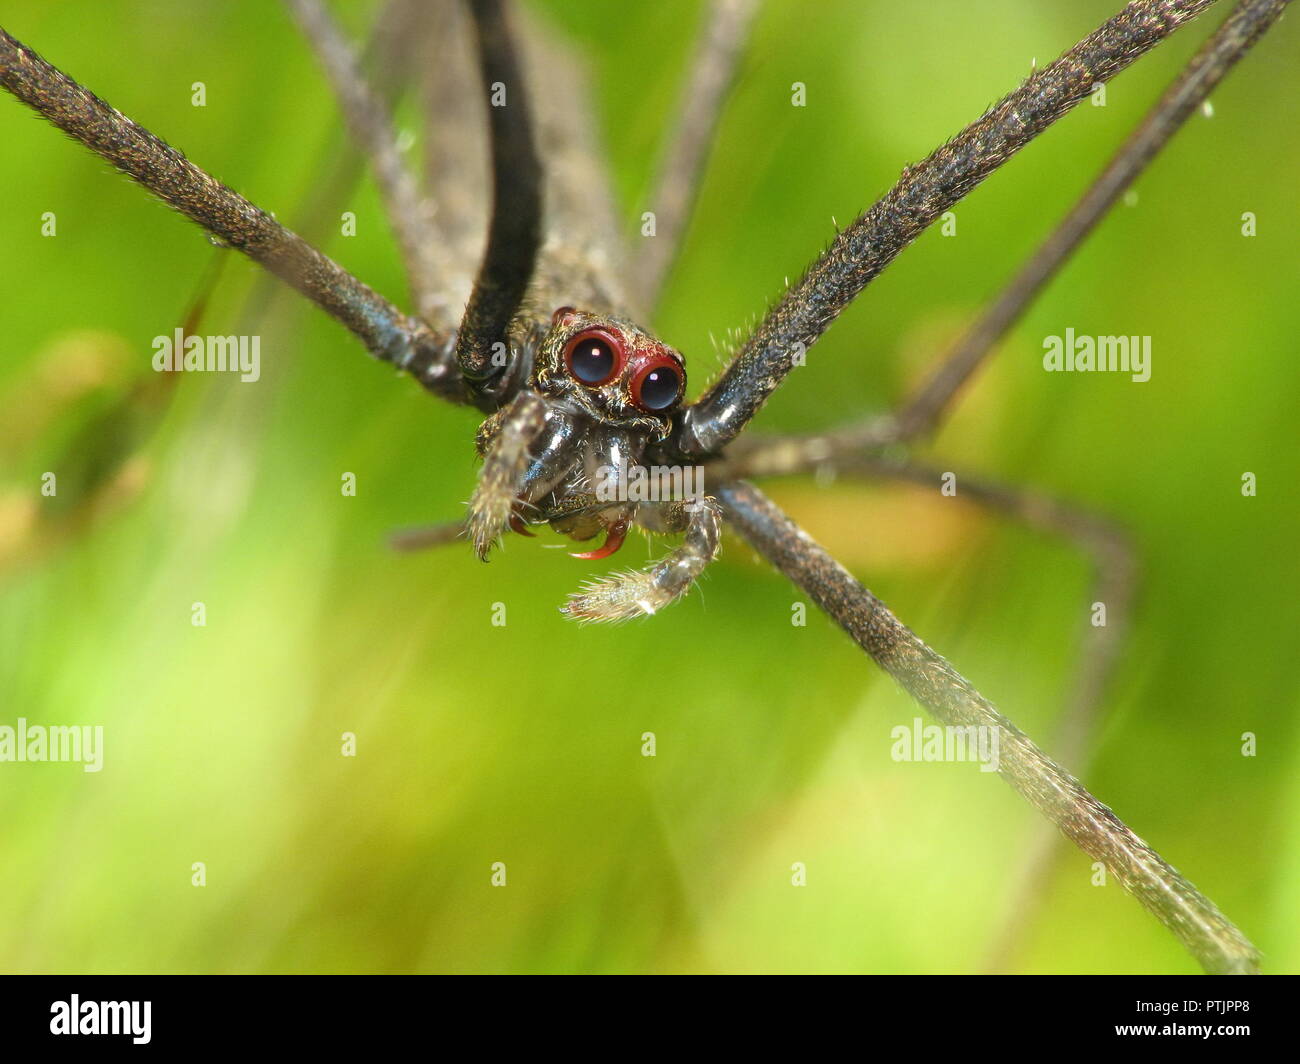 Macro of an ogre faced spider (Deinopis) over green moss, shows the spider eyes in detail while grooming it's leg between the fangs Stock Photo